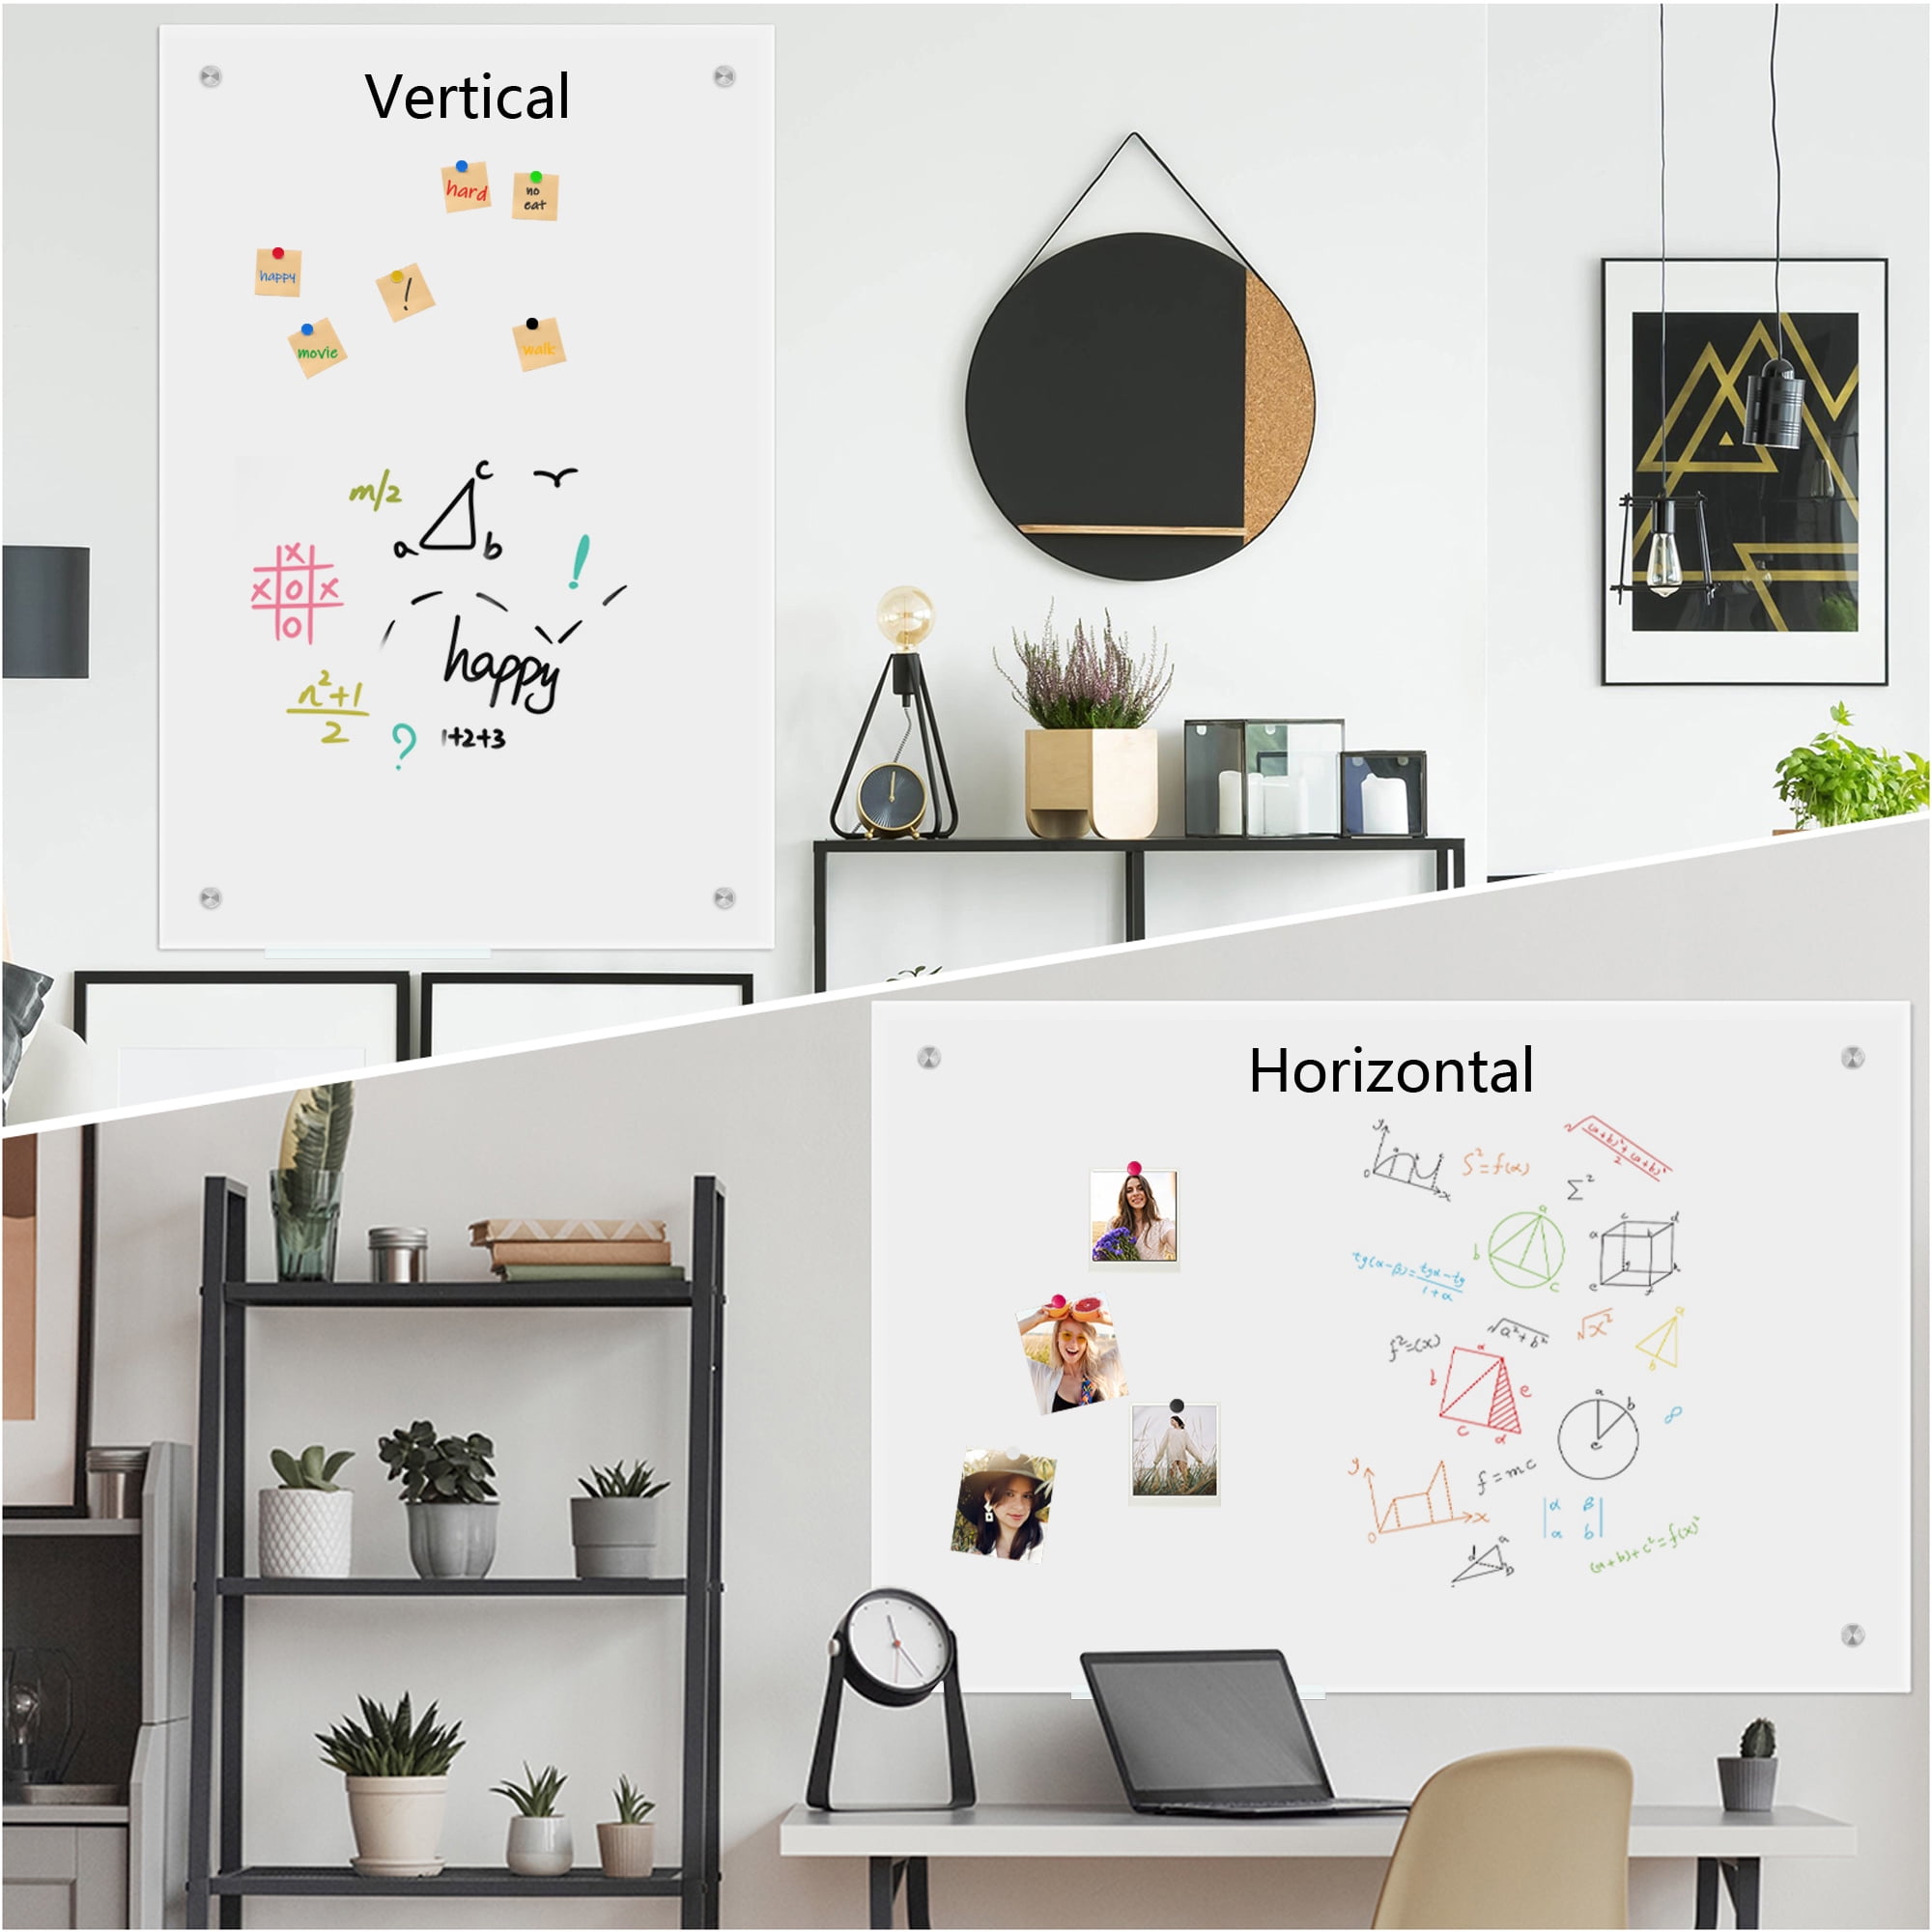 x Board Magnetic Whiteboard/Dry Erase Board, 48 inchx36 inch Aluminum Frame White Boards with Detachable Marker Tray for Home, Office and School, Size